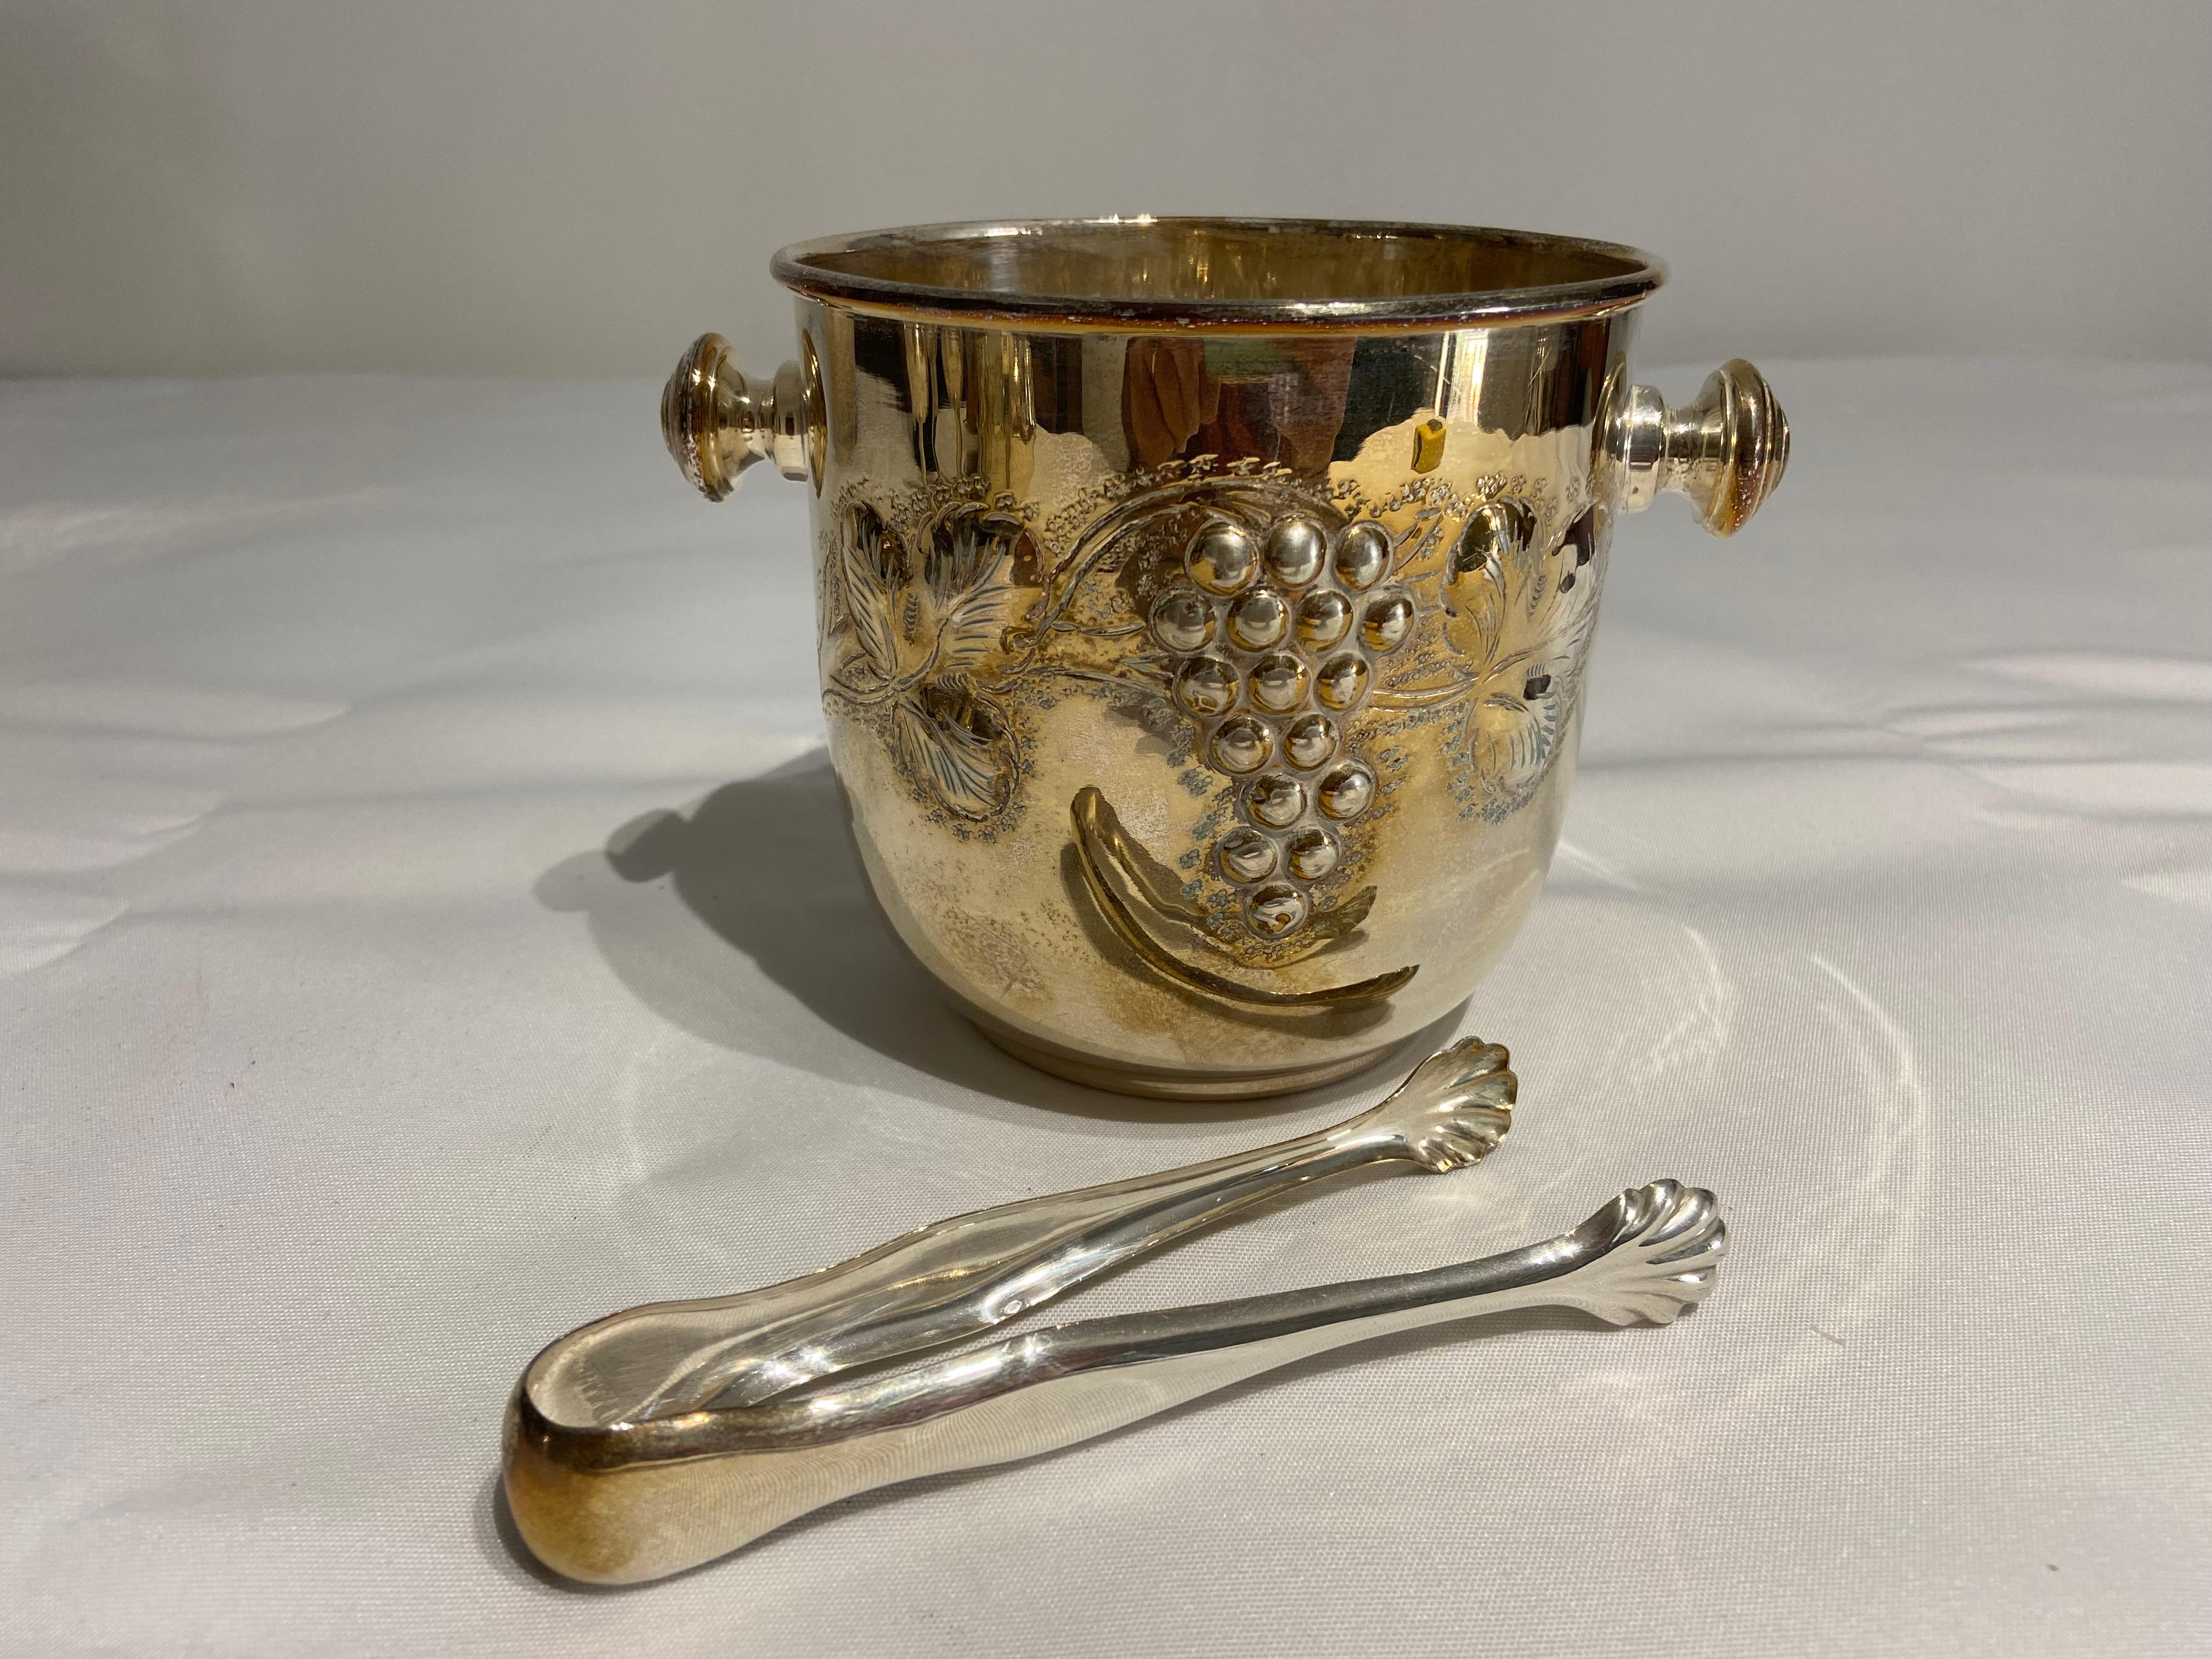 800 Silver Ice Bucket Set and 800 Silver Clamp
Diameter 17 cm (15 cm excluding knobs). The set weighs 353.00 grams (ice bucket 330.00 grams and pliers 23.00 grams).
Never used.
Regularly stamped with state marks.